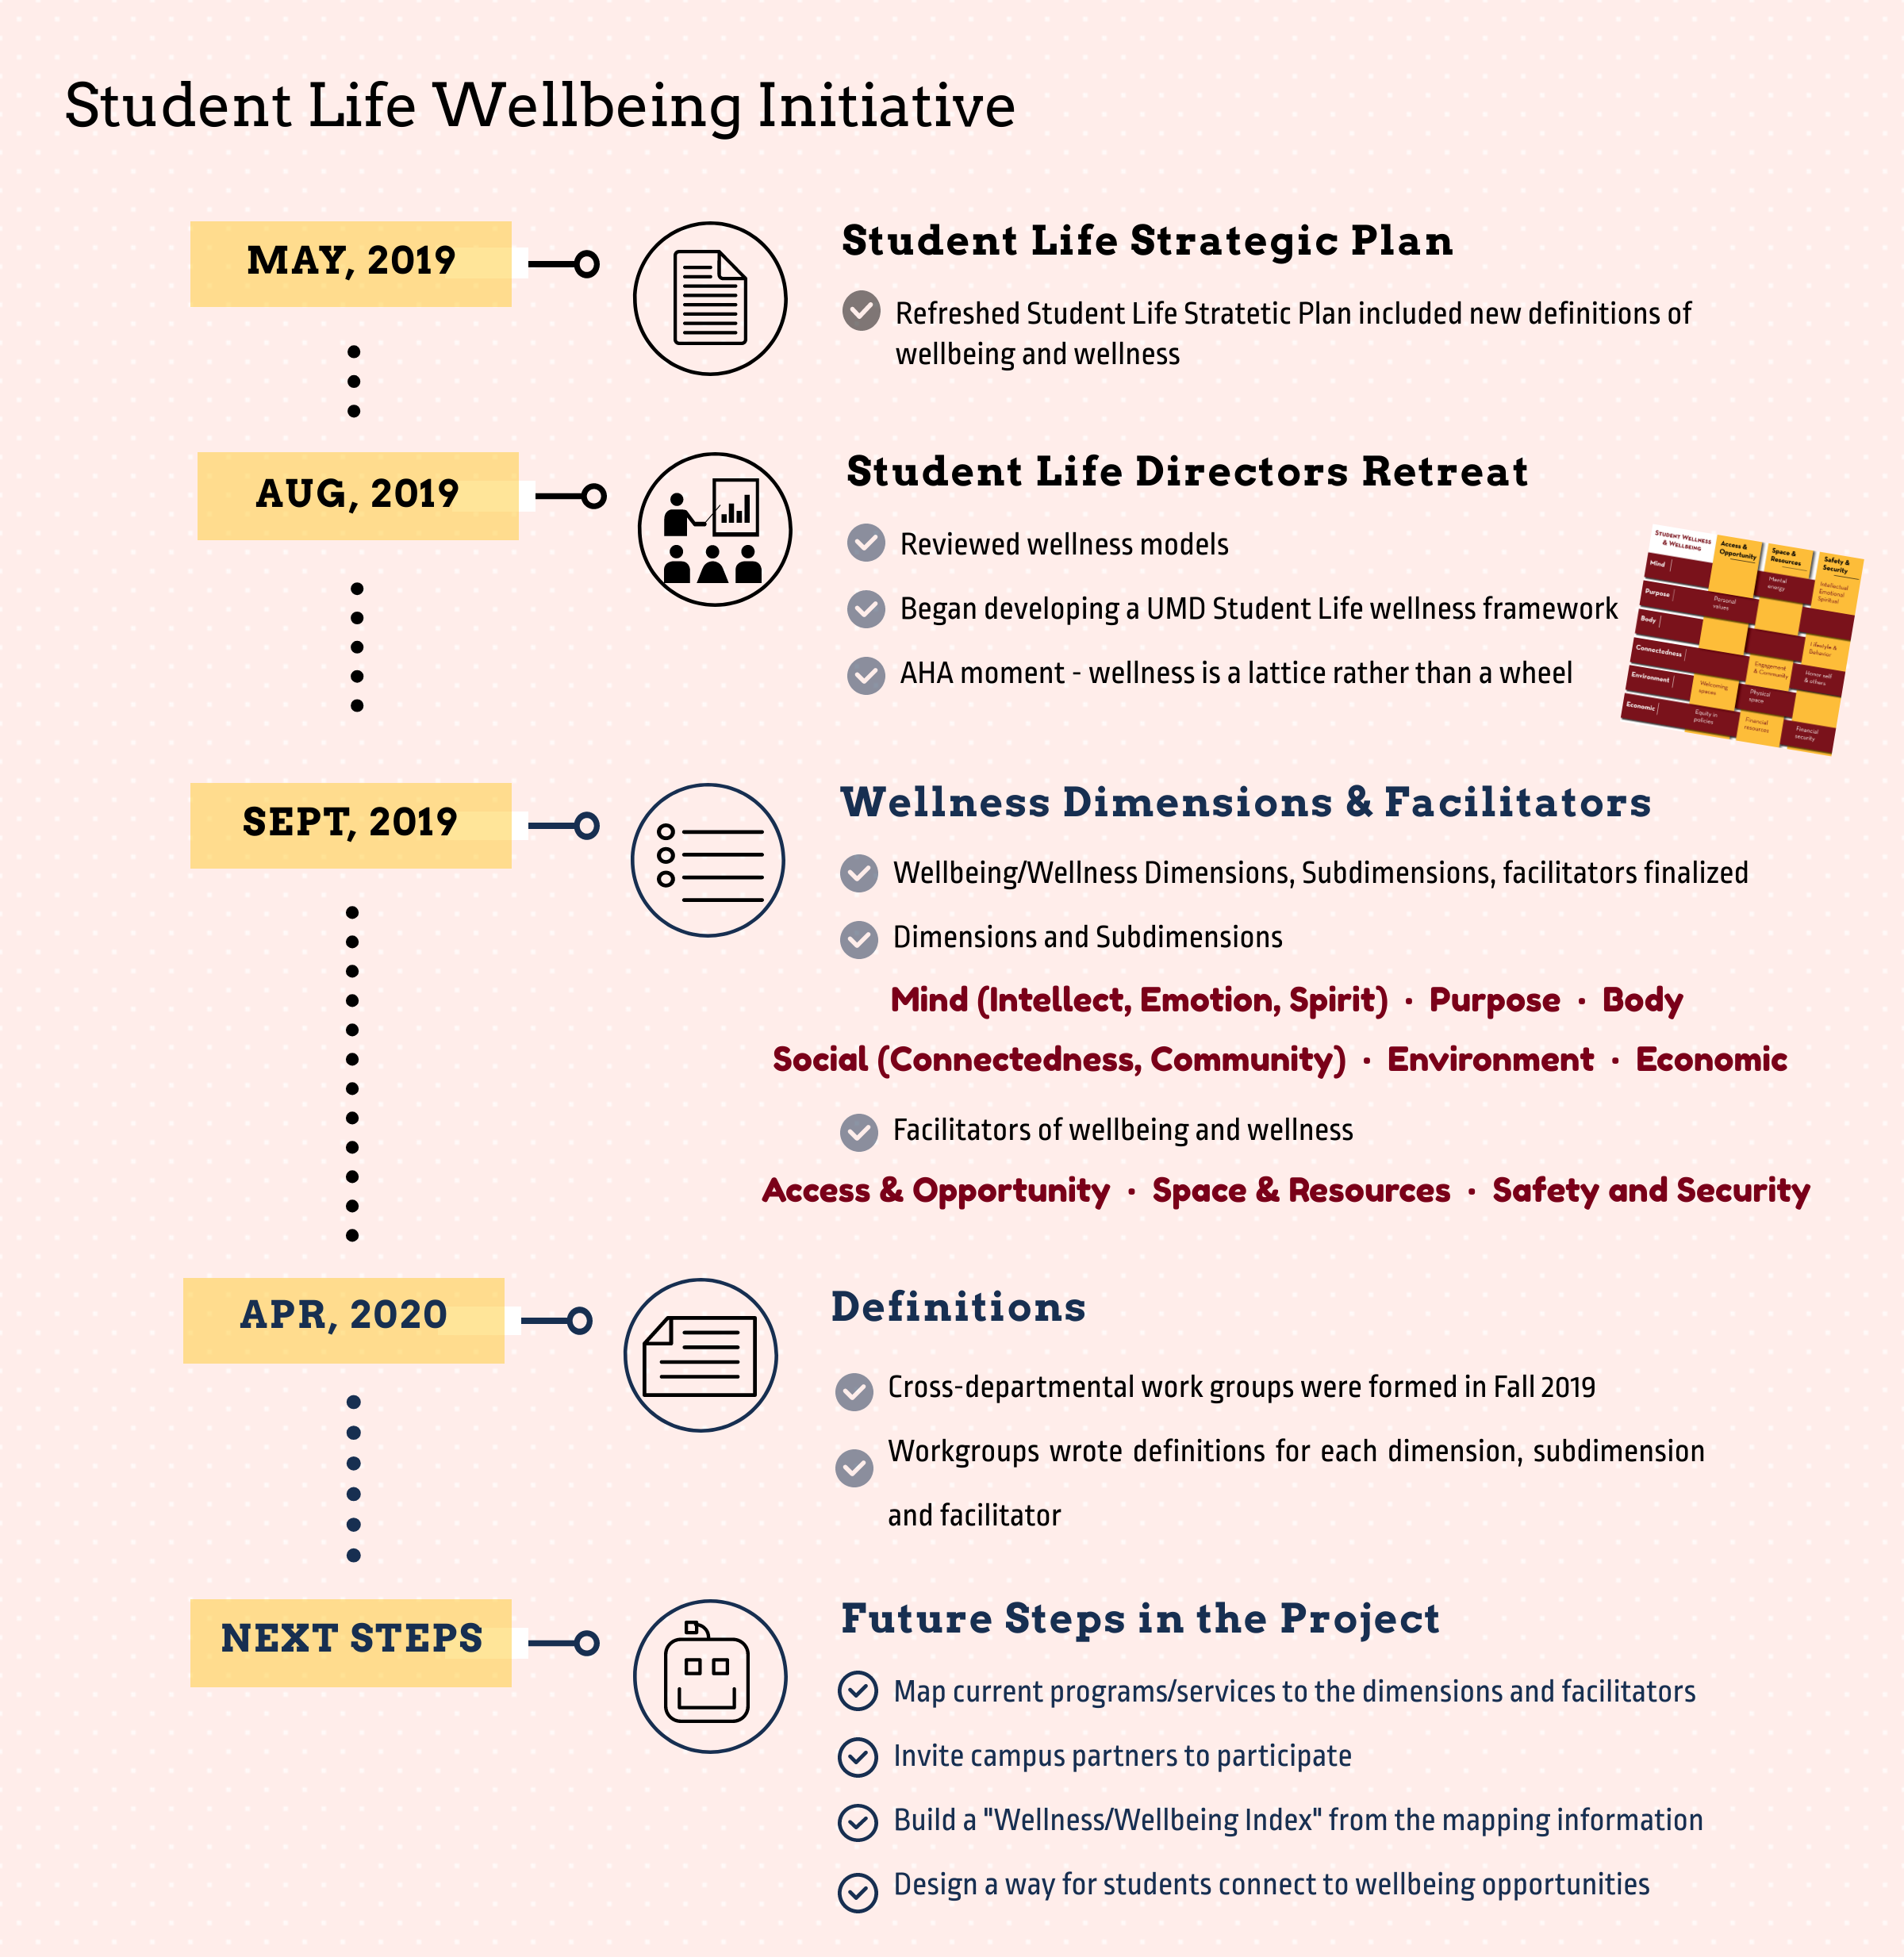 timeline for the Student Life wellbeing project